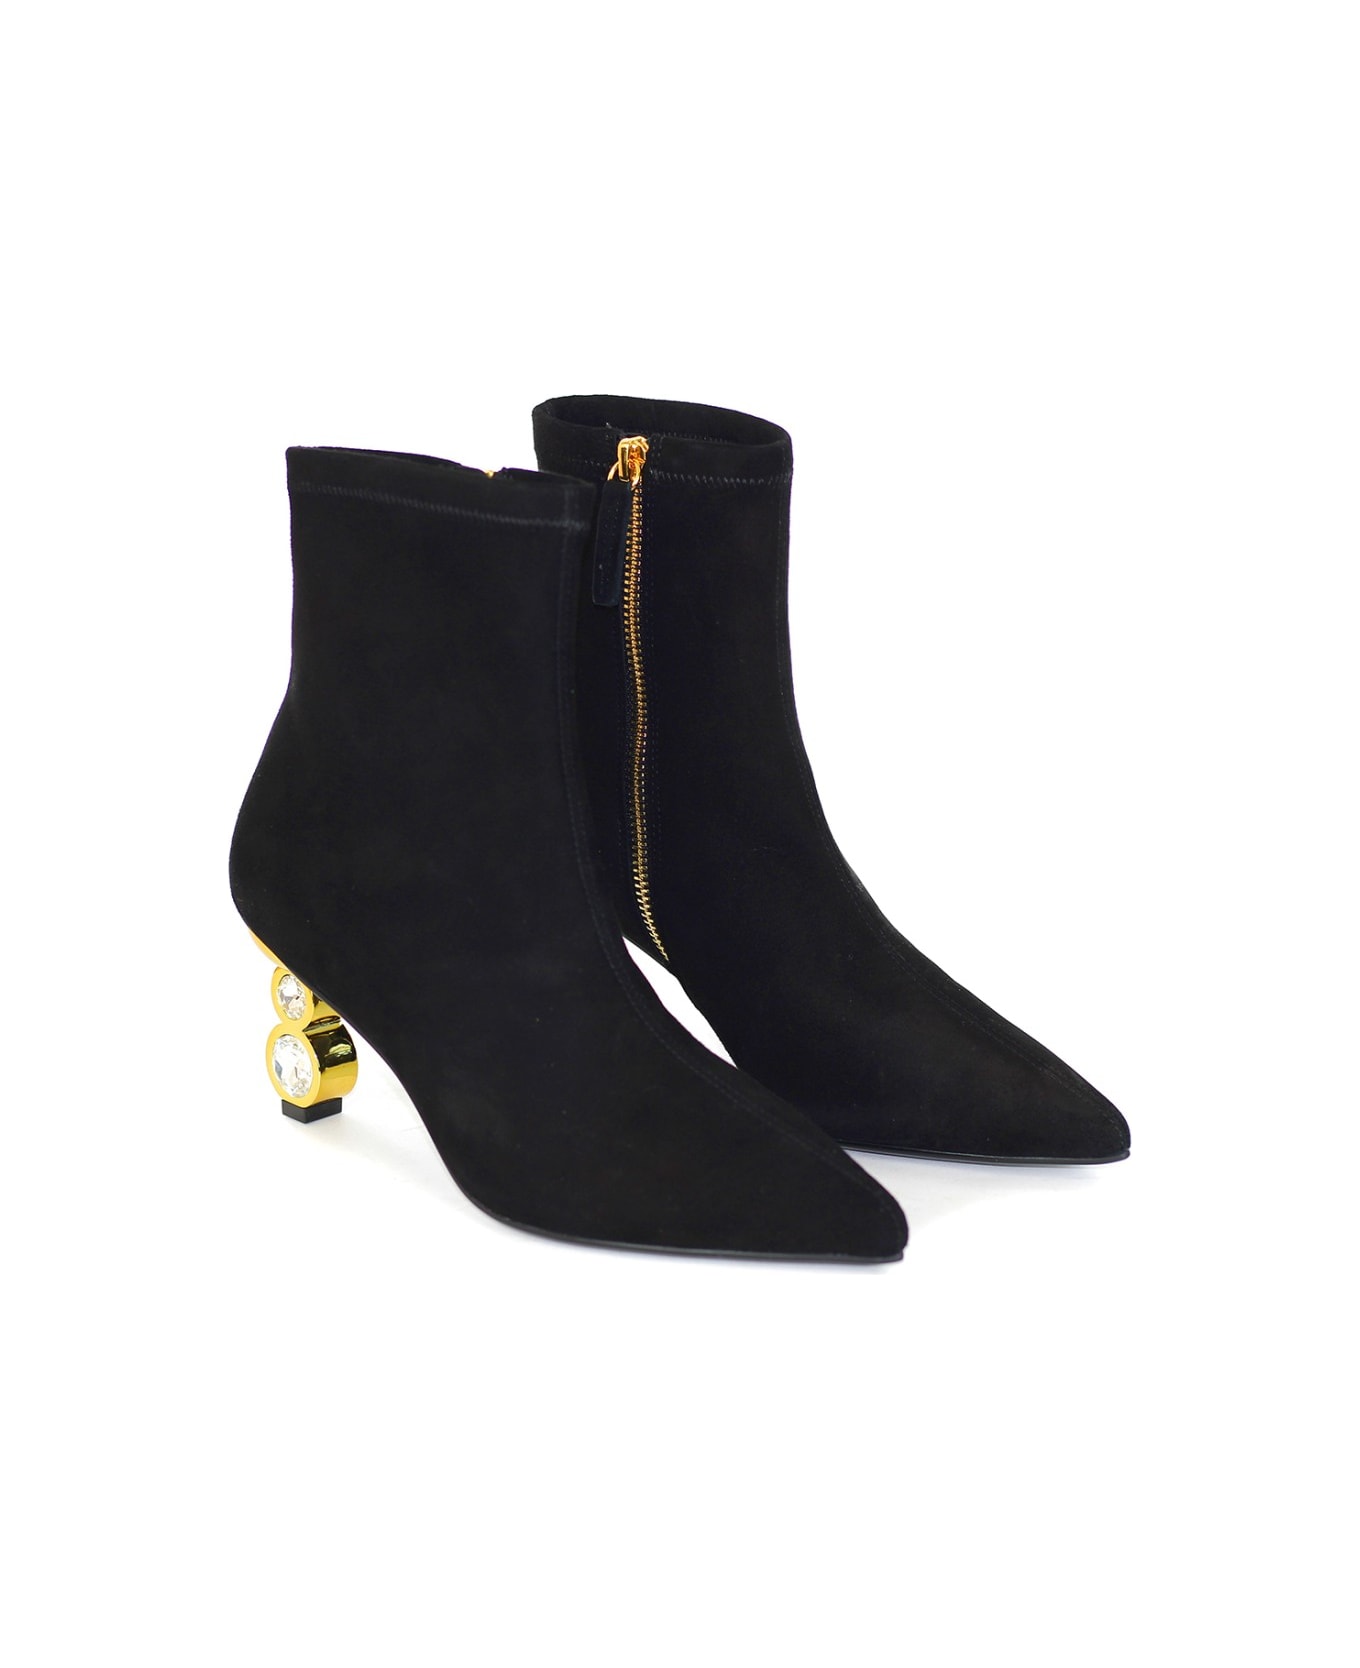 Kat Maconie Boots Ankle - Black Gold ブーツ